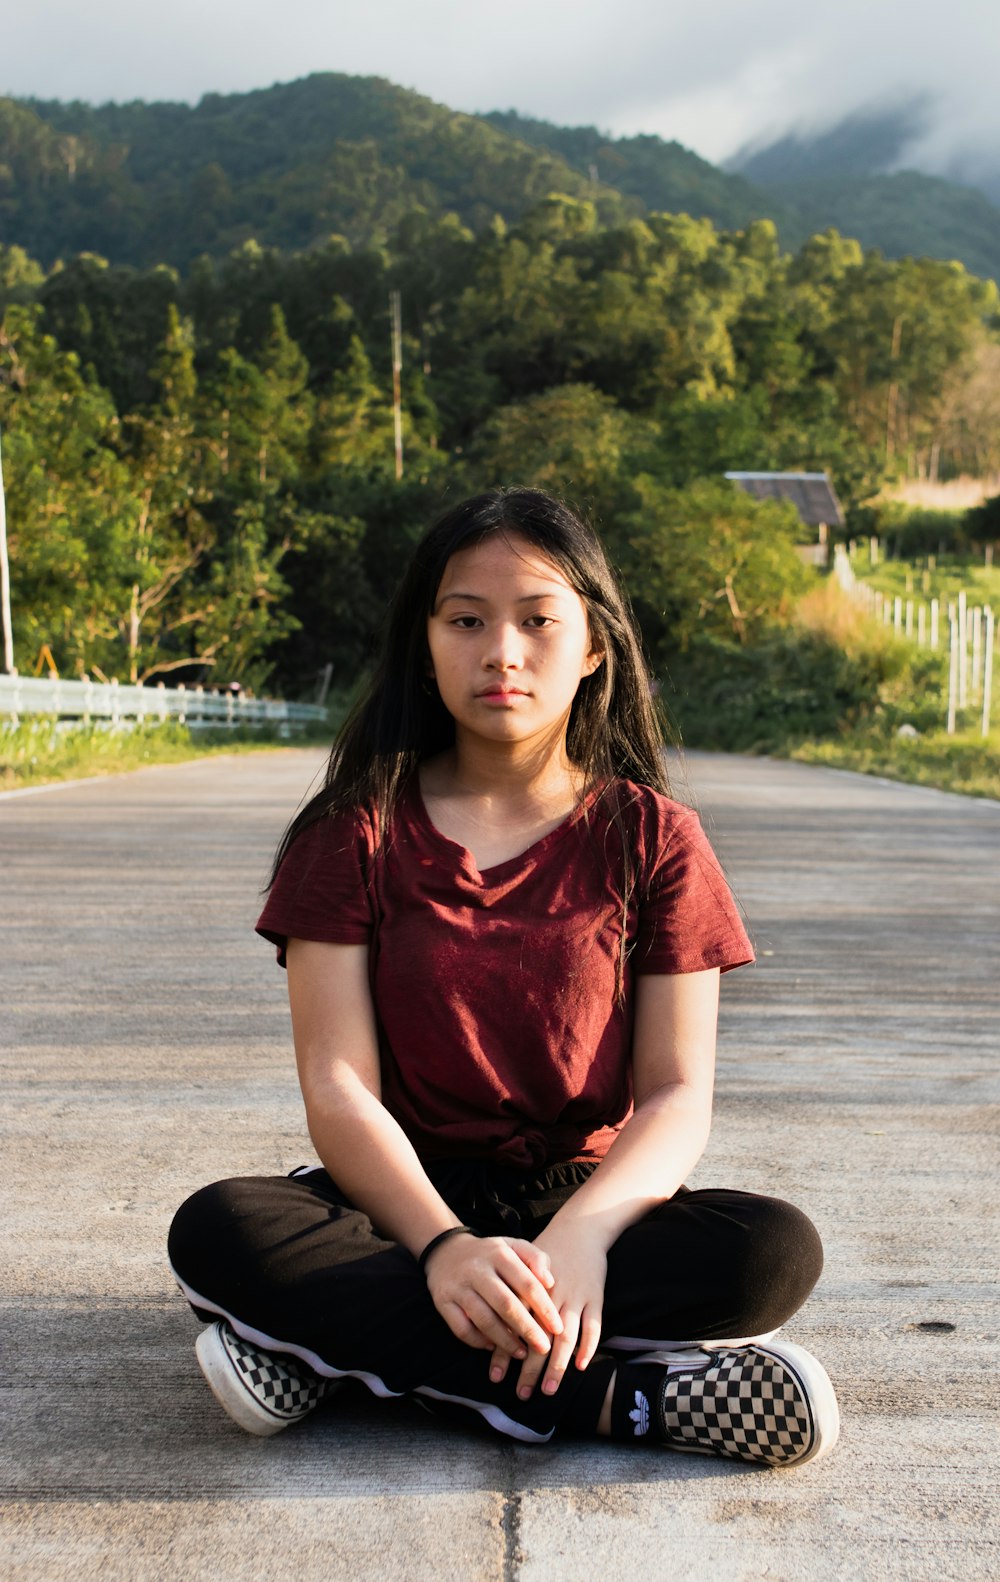 woman in red crew neck t-shirt and black pants sitting on gray concrete road during